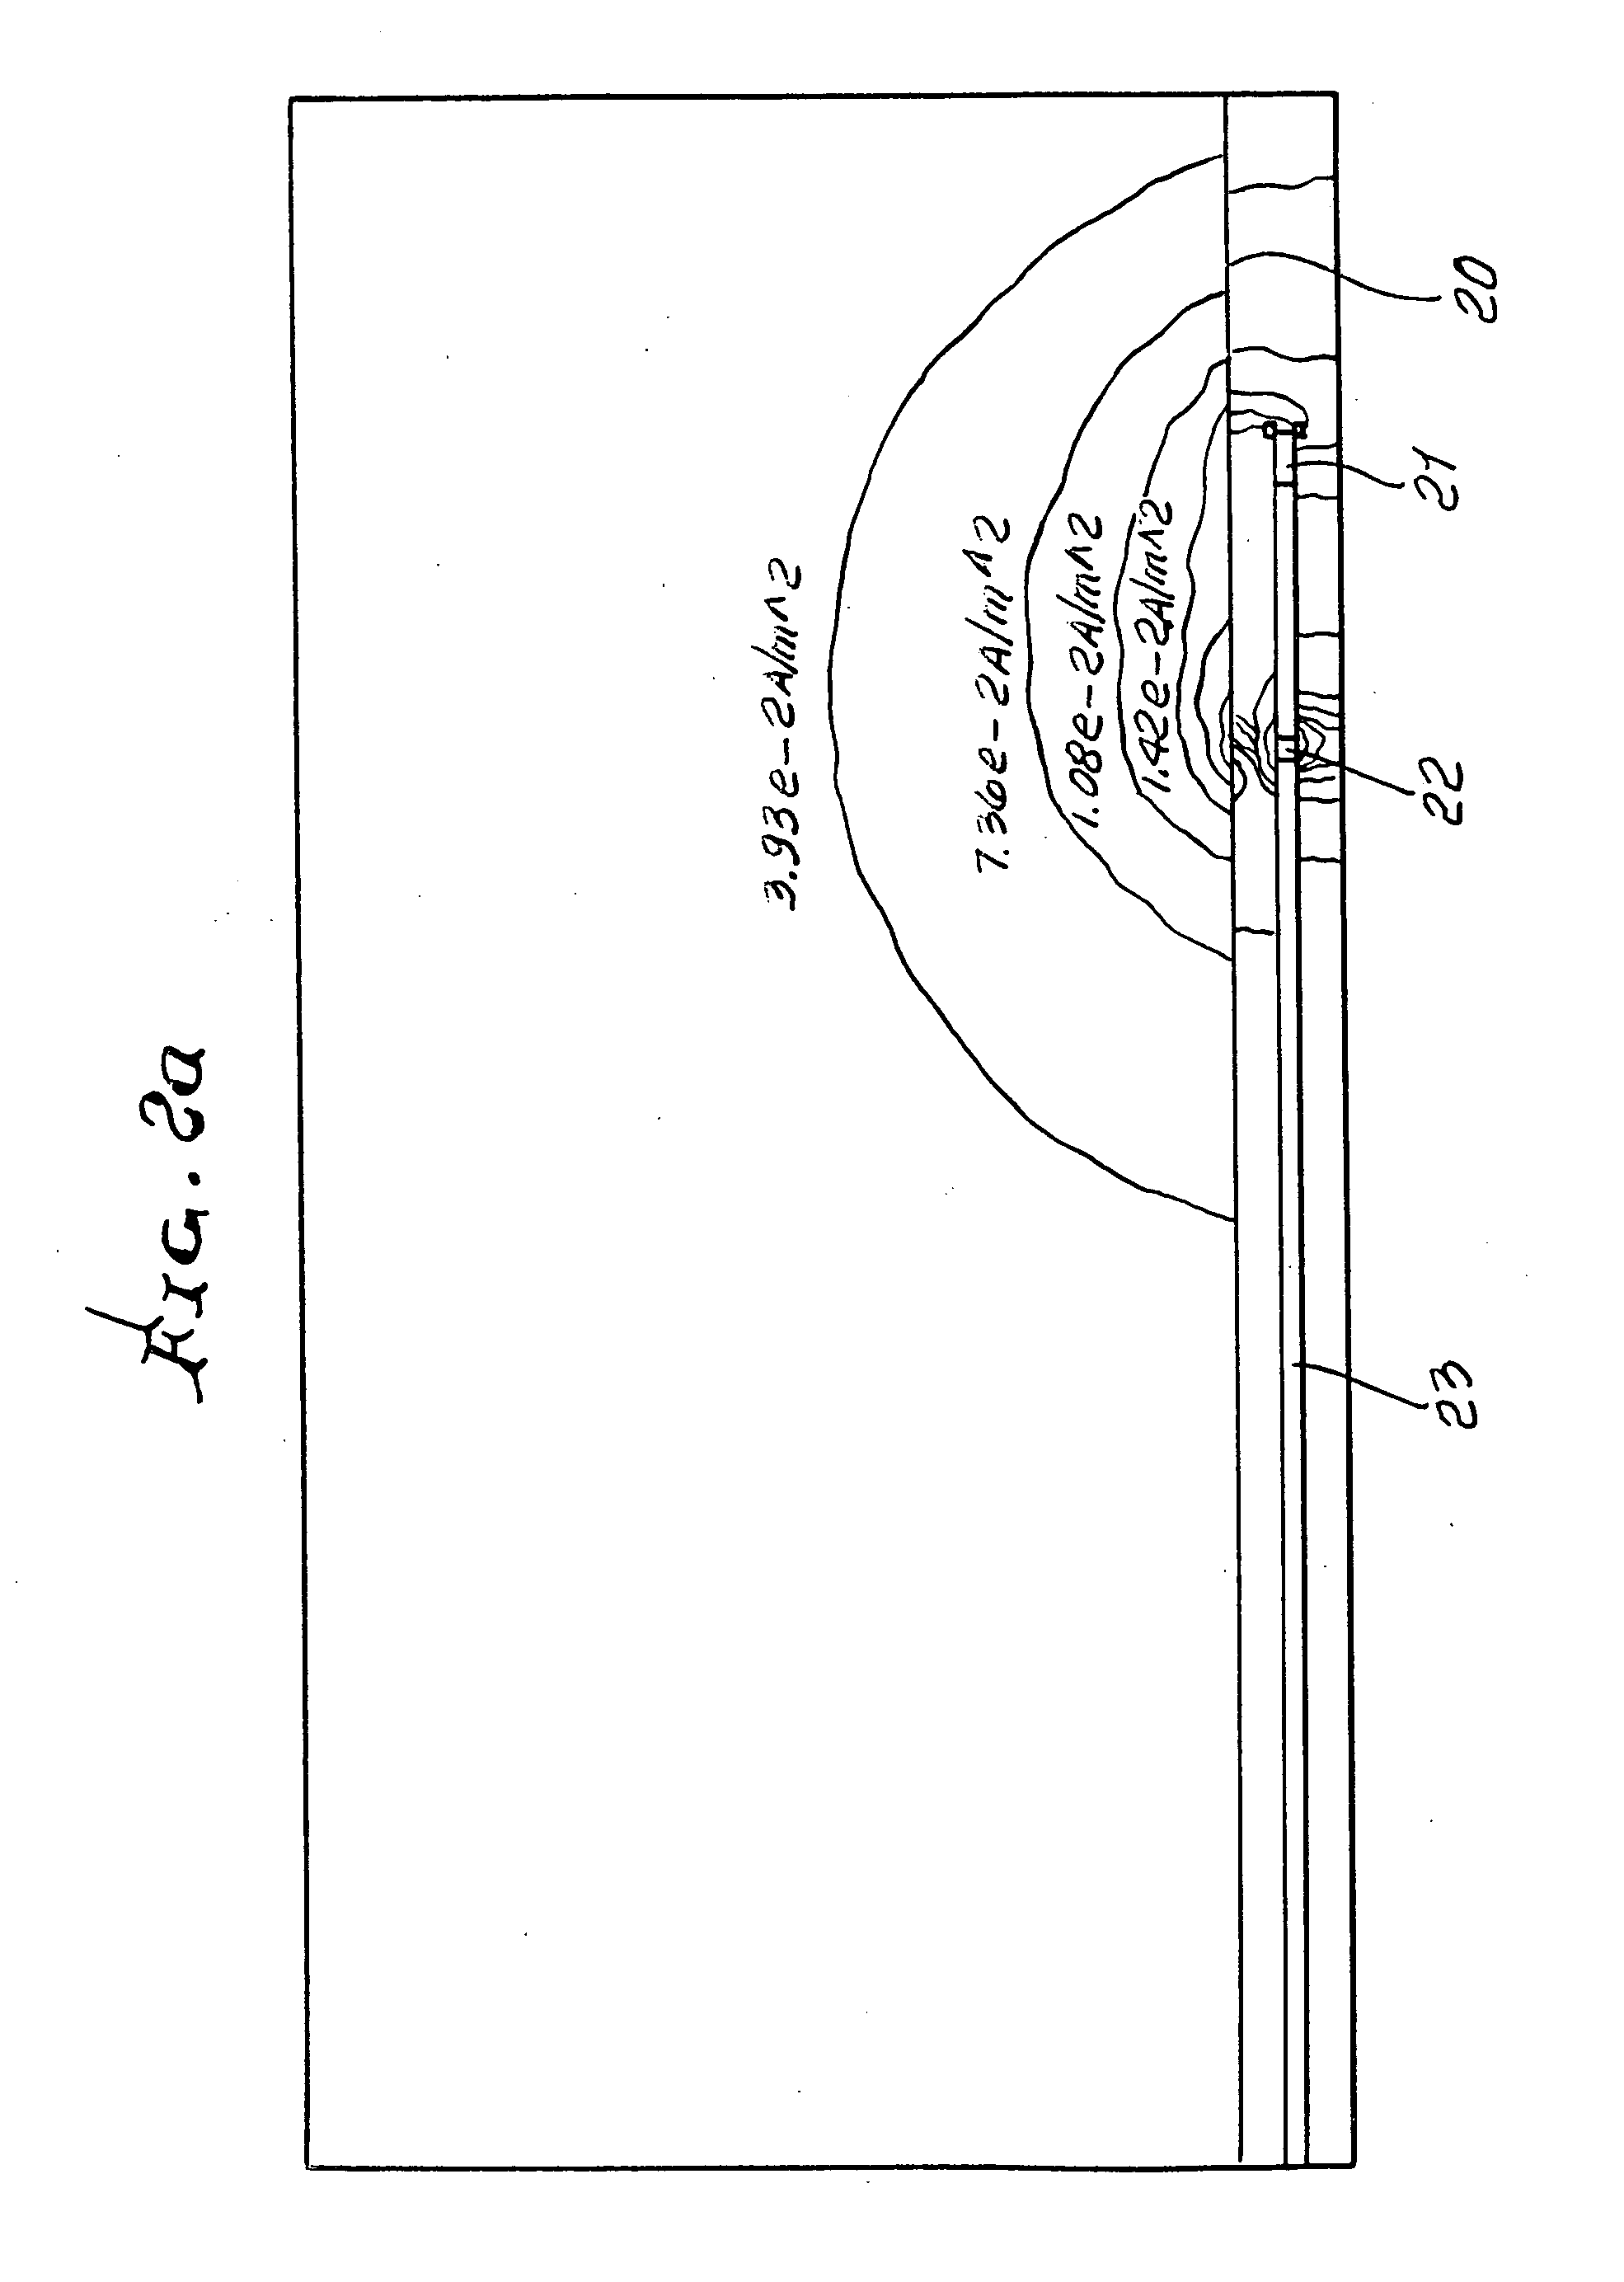 Sub-surface formation boundary detection using an electric-field borehole telemetry apparatus